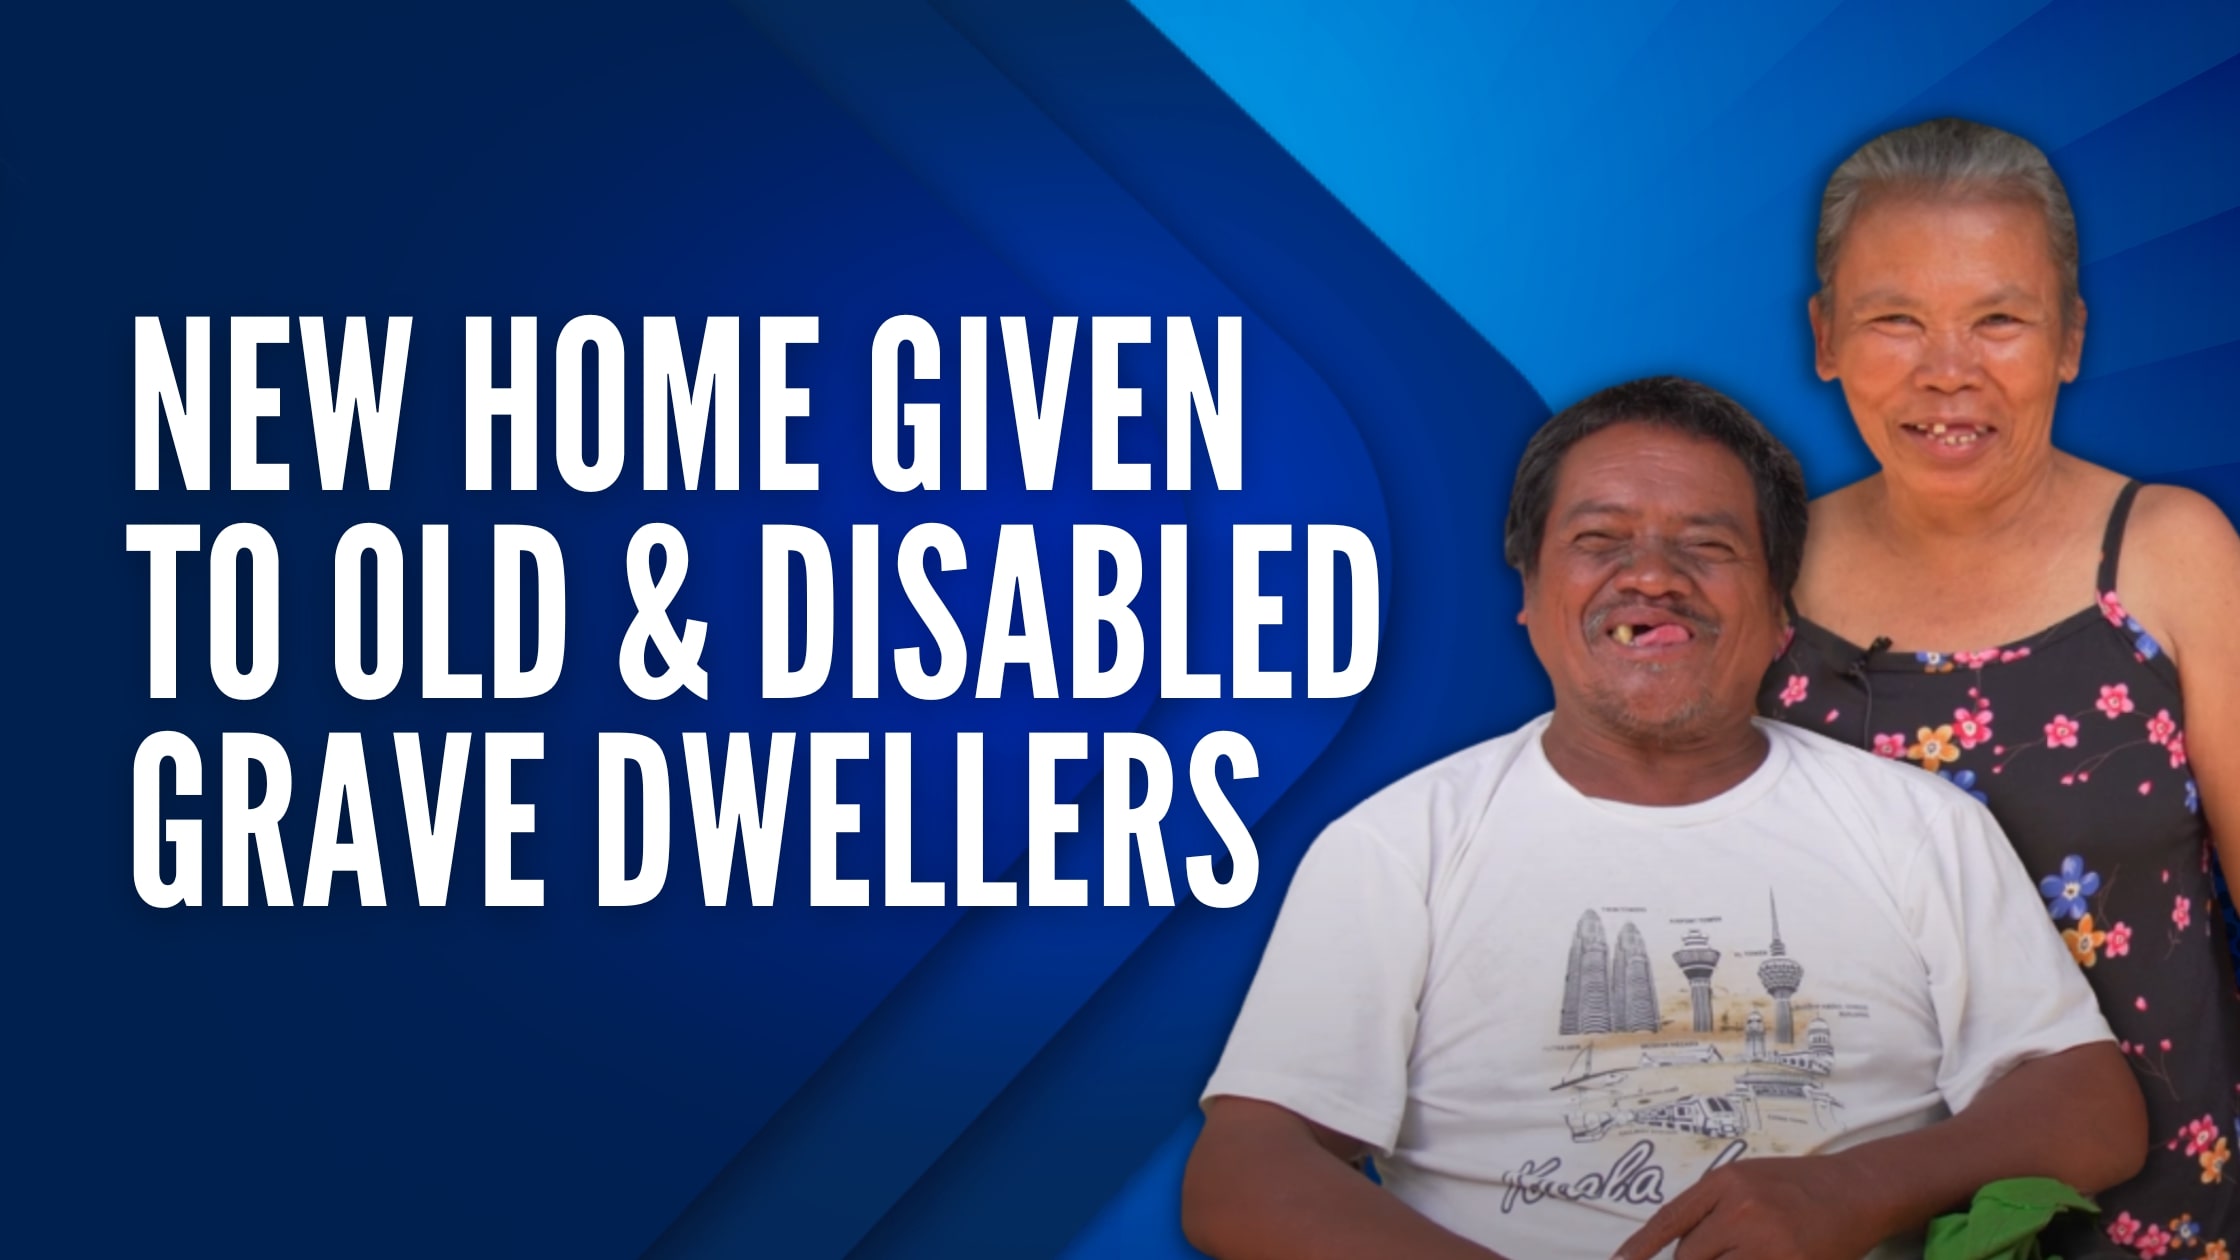 new home given to old disabled graveyard dweller couple